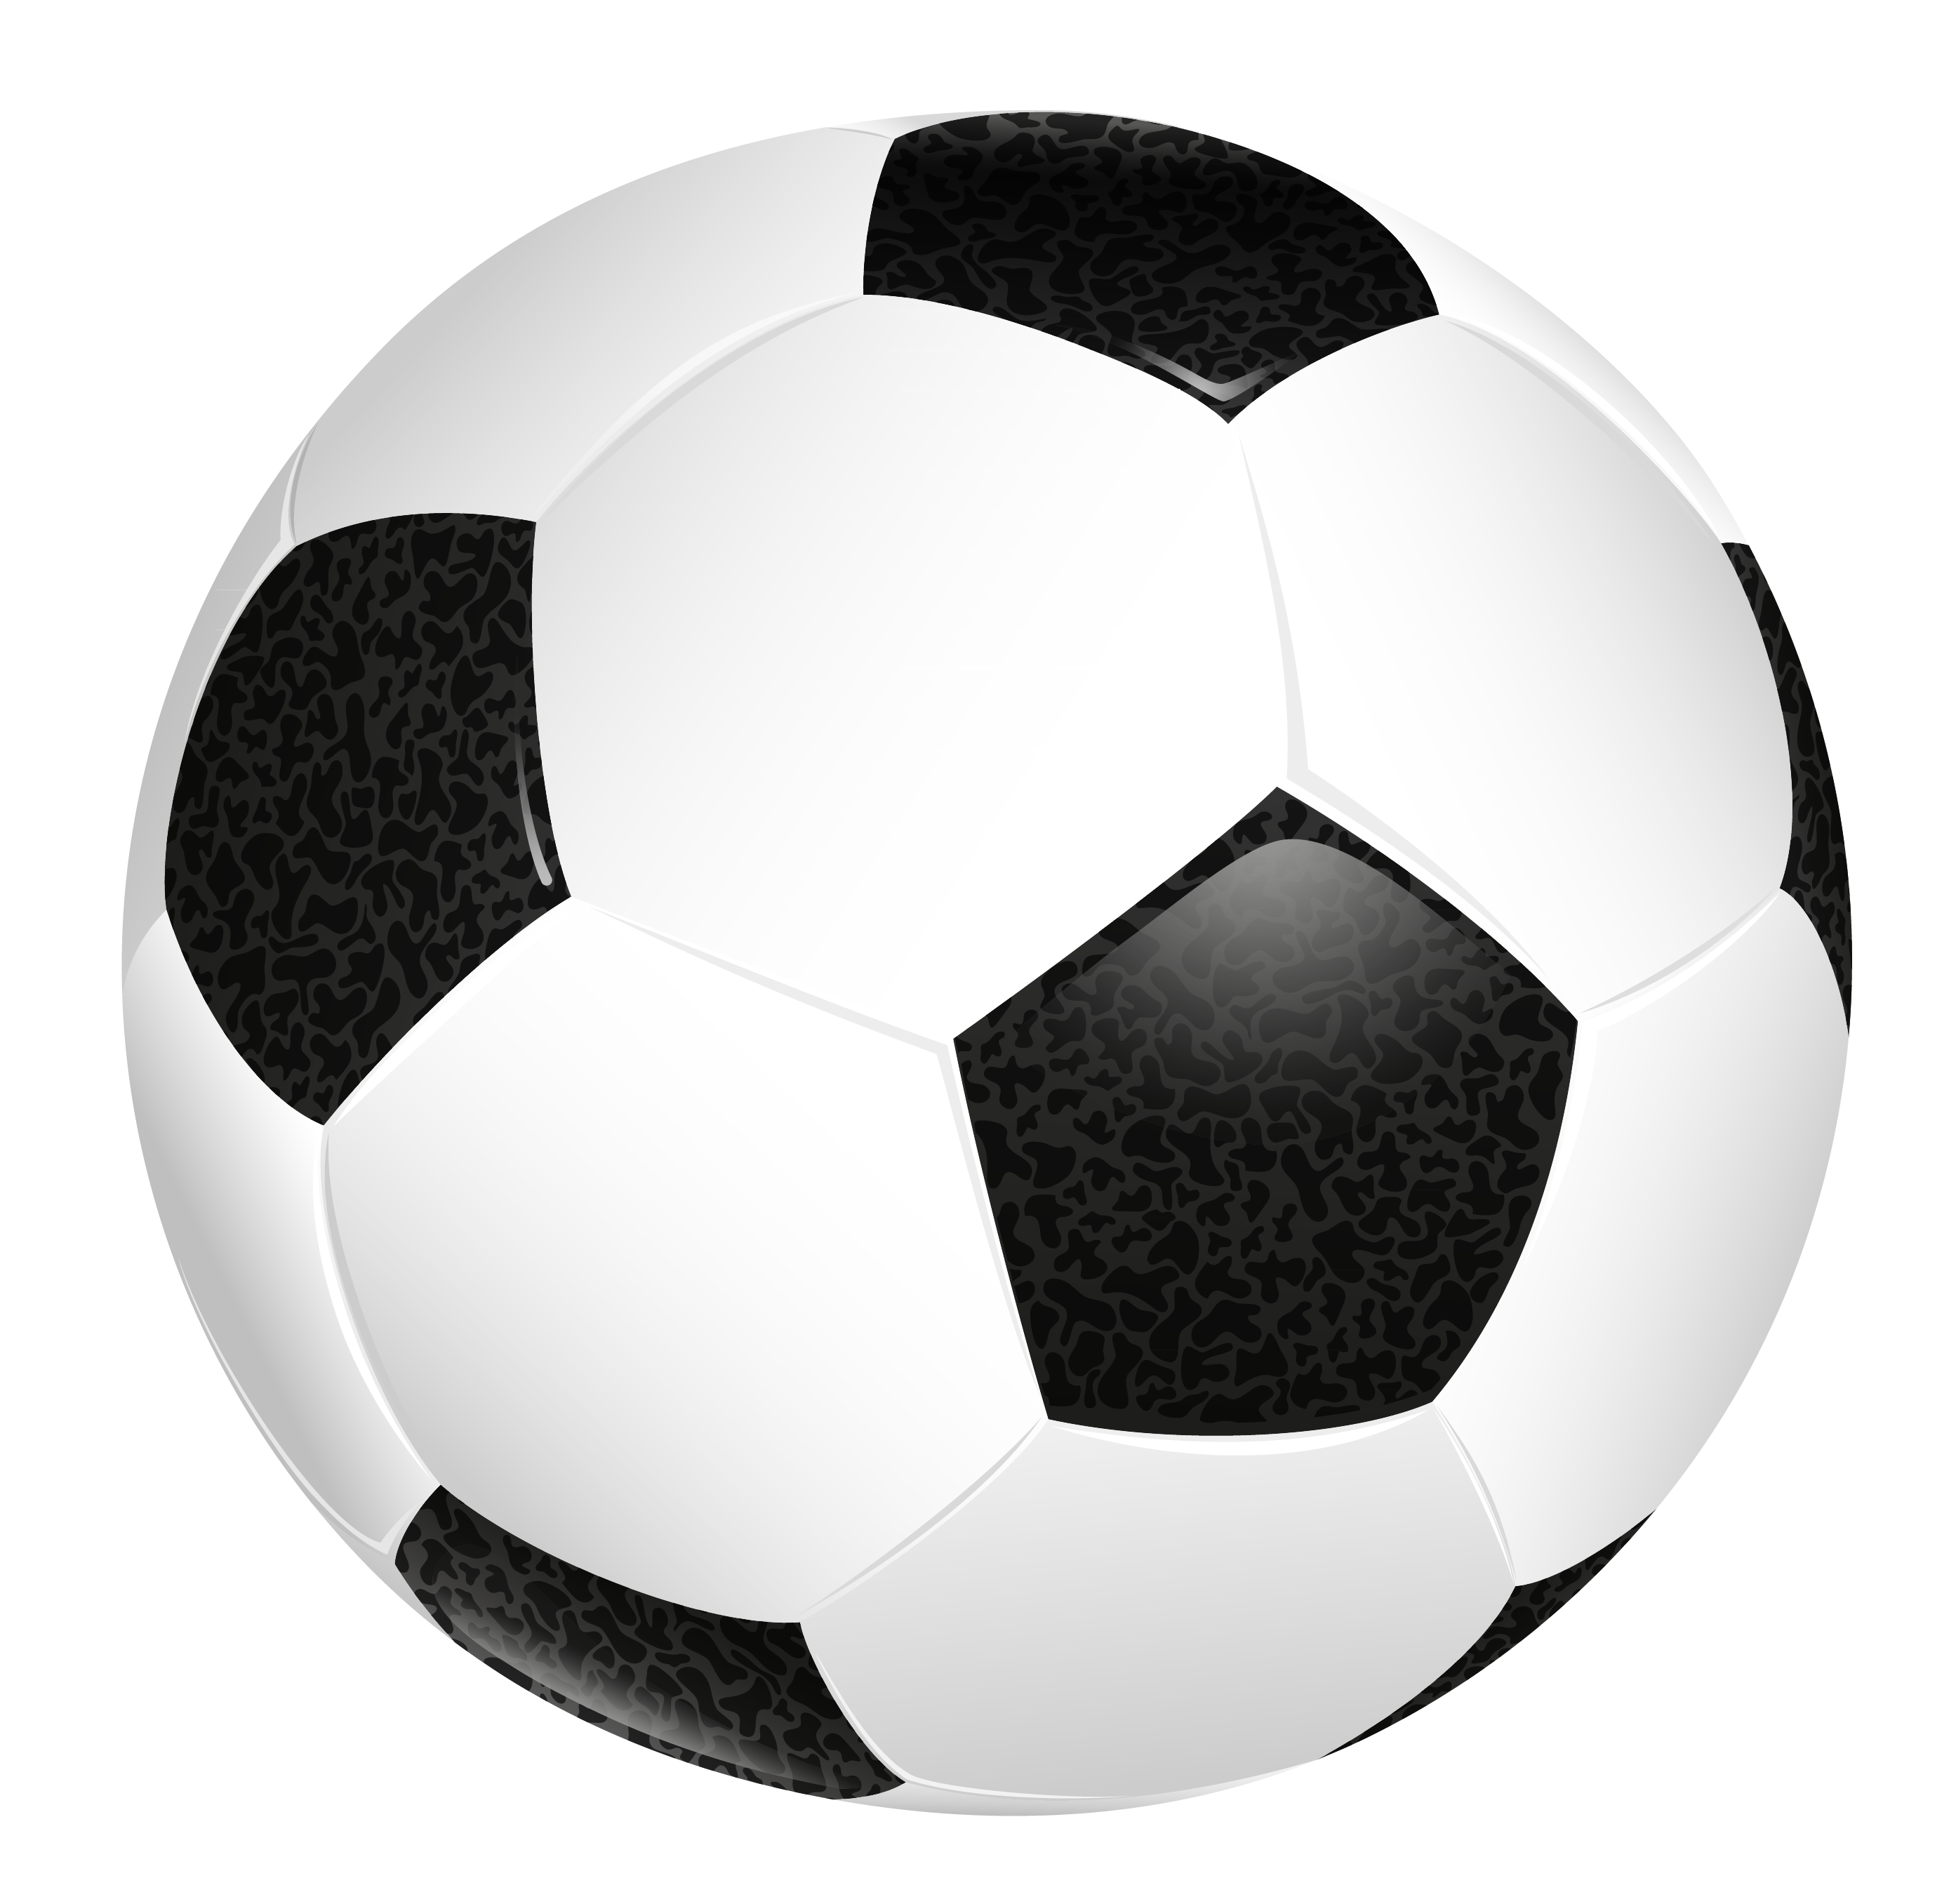 Download transparent png images. Football ball